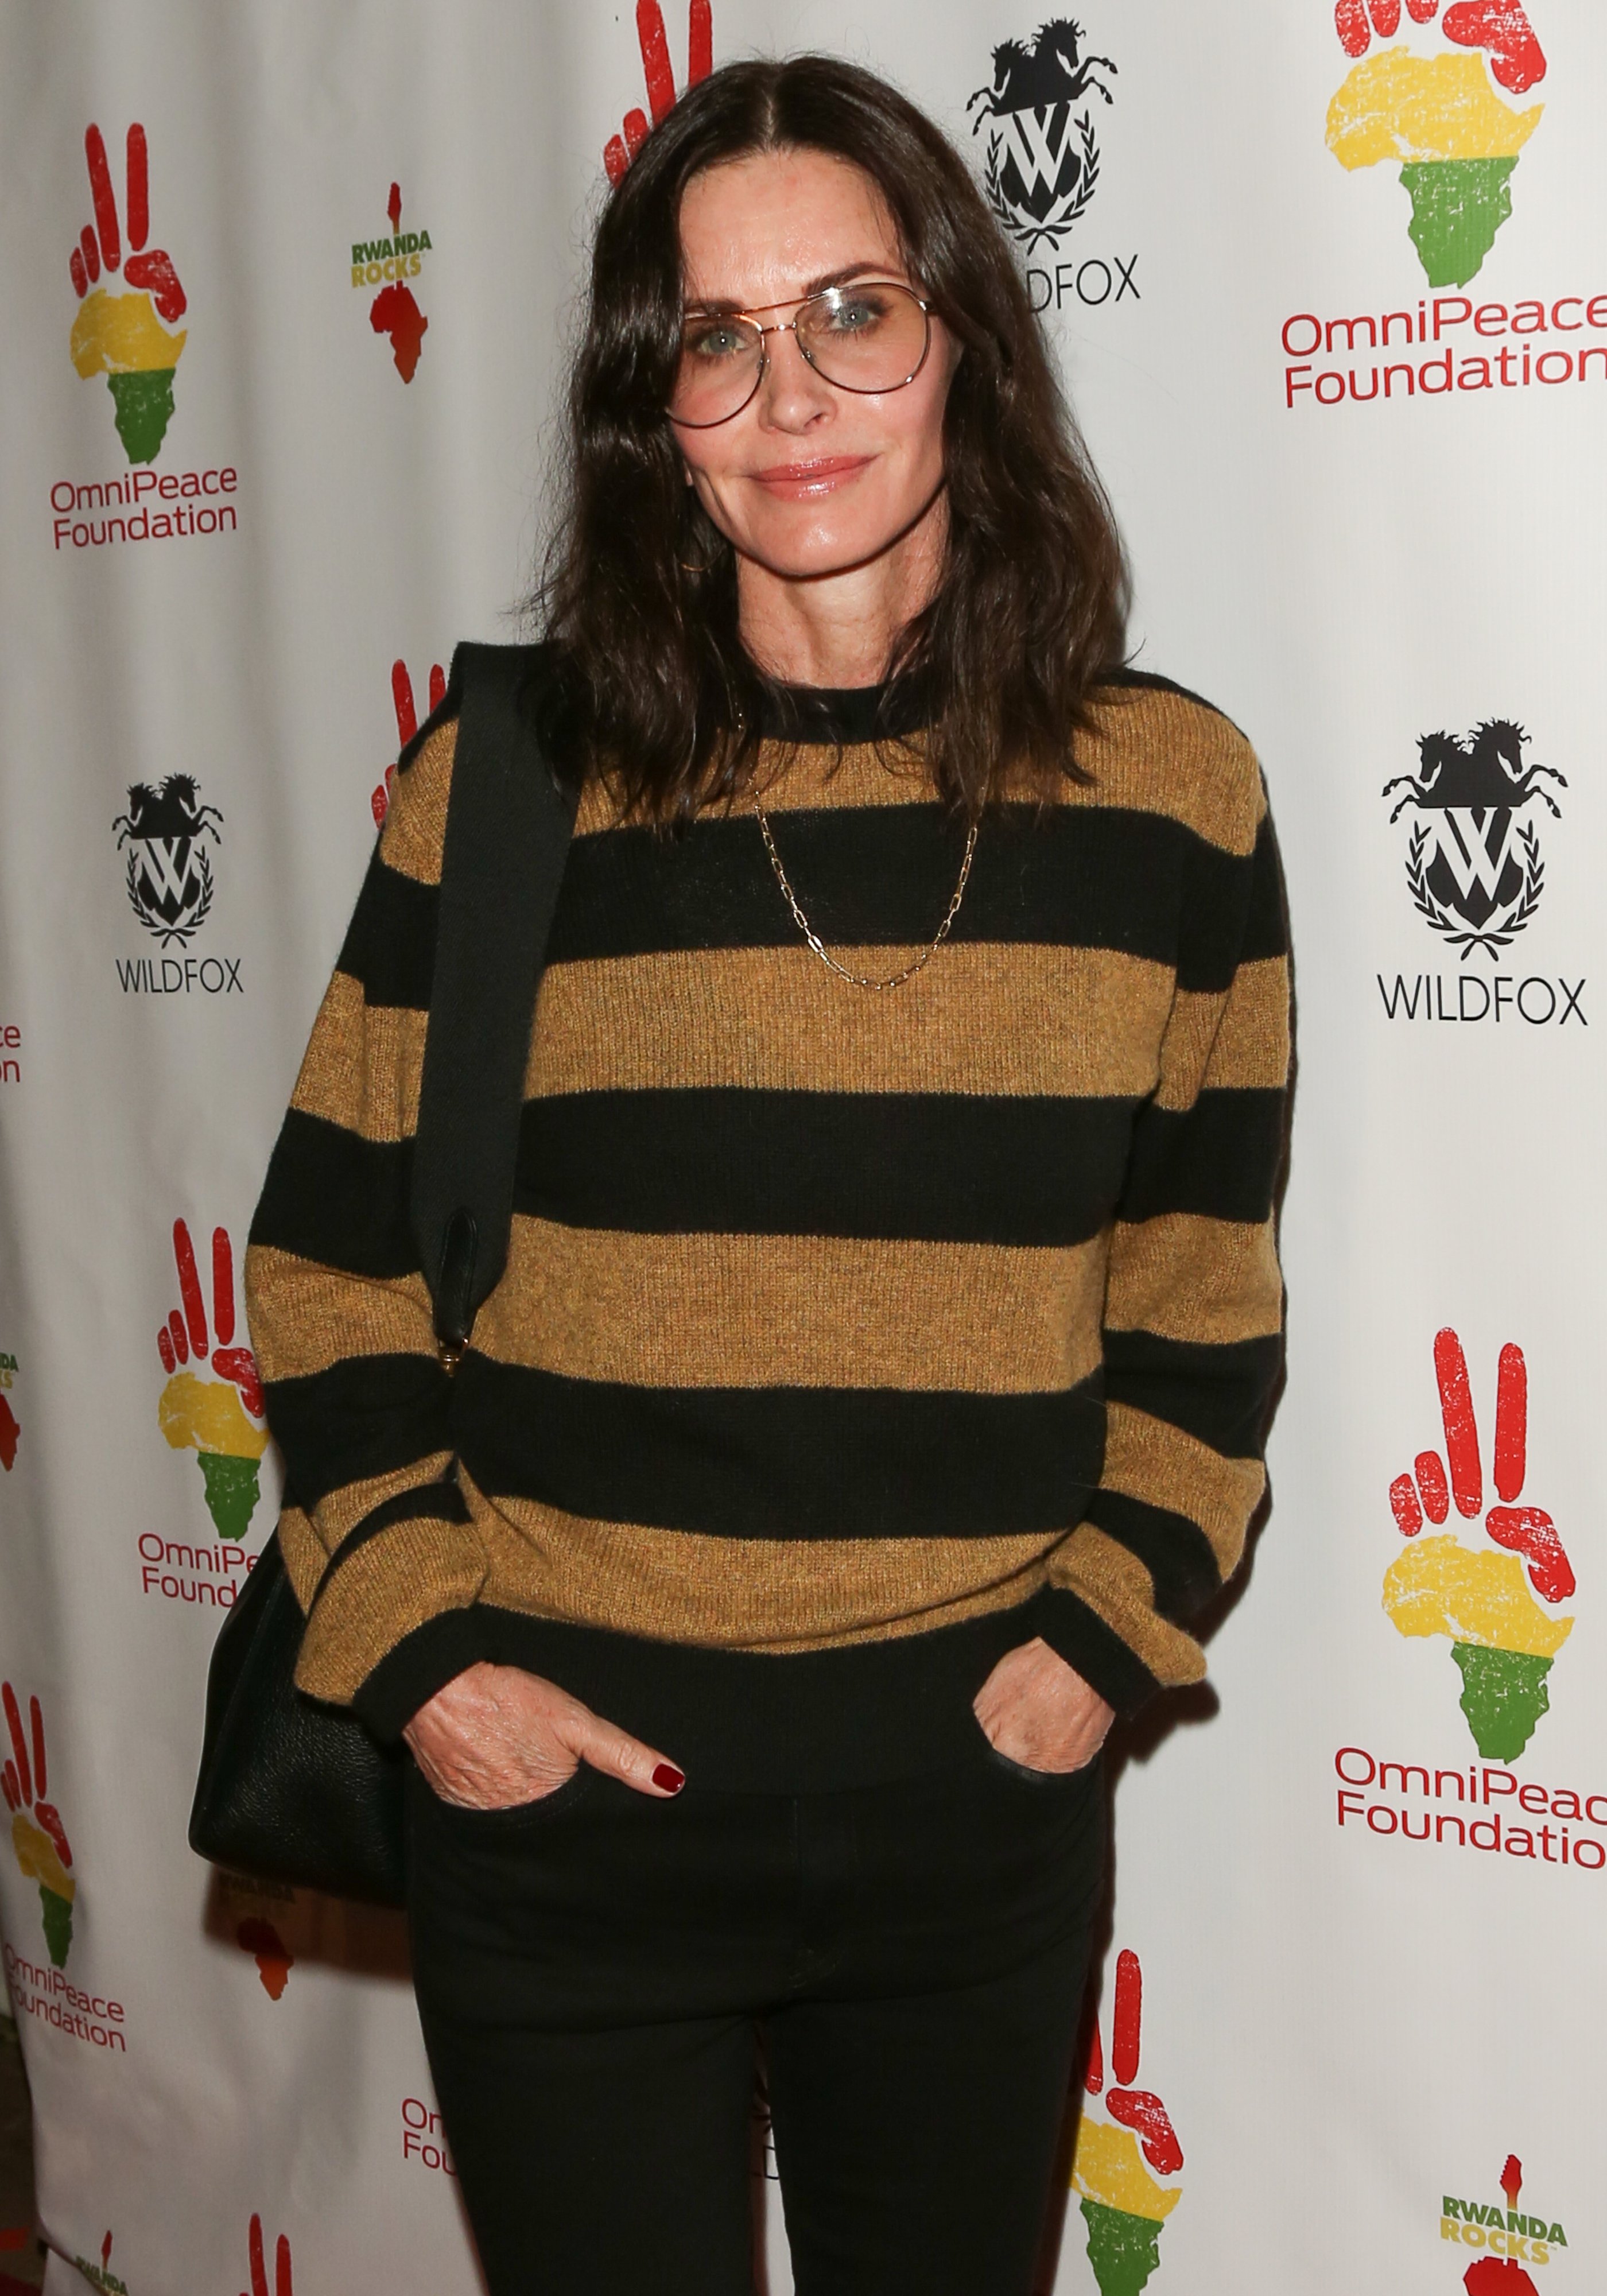 Courteney Cox attends the 2nd Annual Gala "Rwanda Rocks" Charity Event on November 04, 2019 | Photo: Getty Images